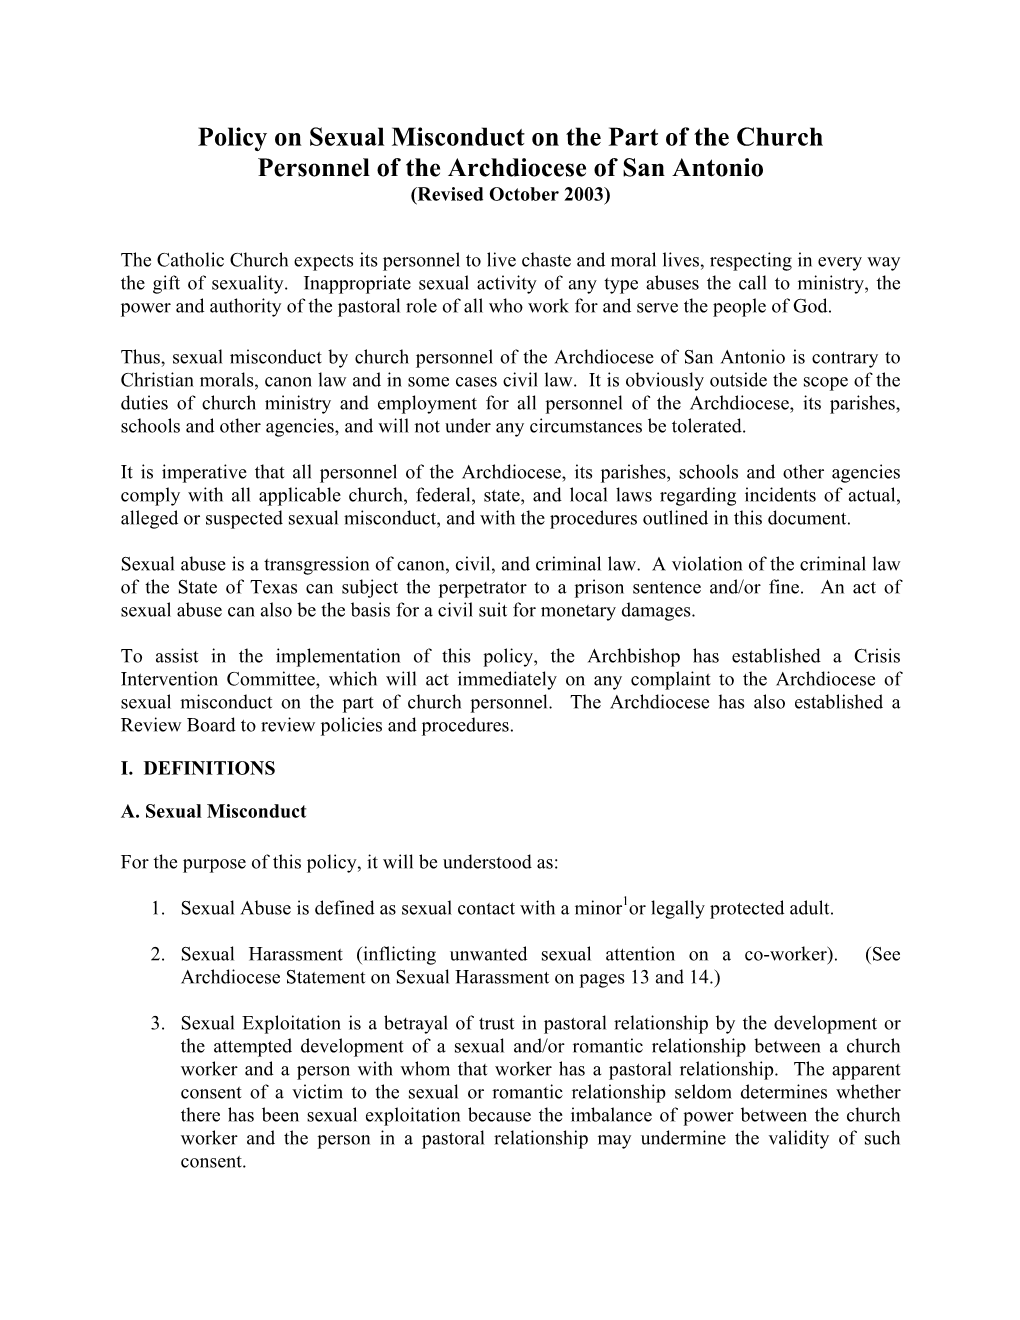 Policy on Sexual Misconduct on the Part of the Church Personnel of the Archdiocese of San Antonio (Revised October 2003)